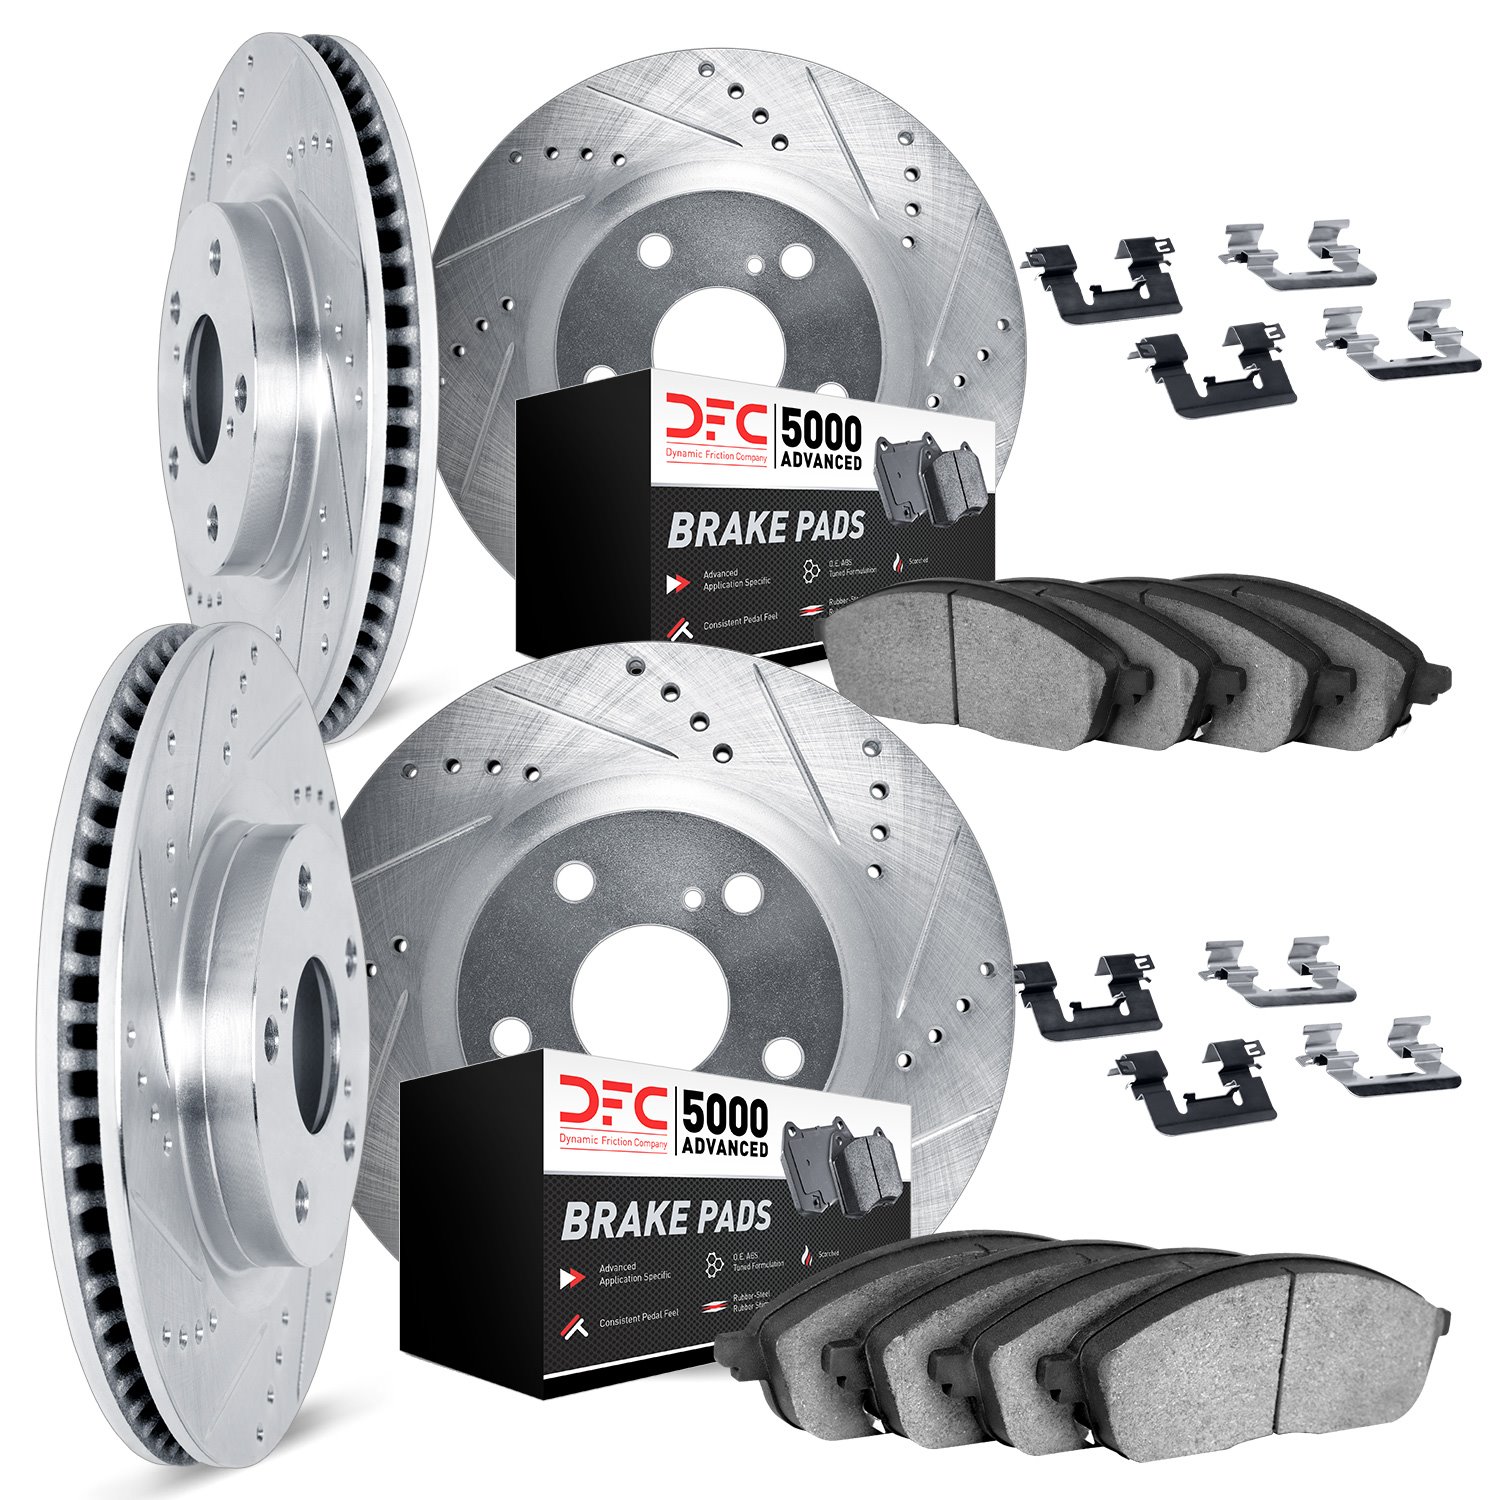 7514-63107 Drilled/Slotted Brake Rotors w/5000 Advanced Brake Pads Kit & Hardware [Silver], 2006-2012 Mercedes-Benz, Position: F